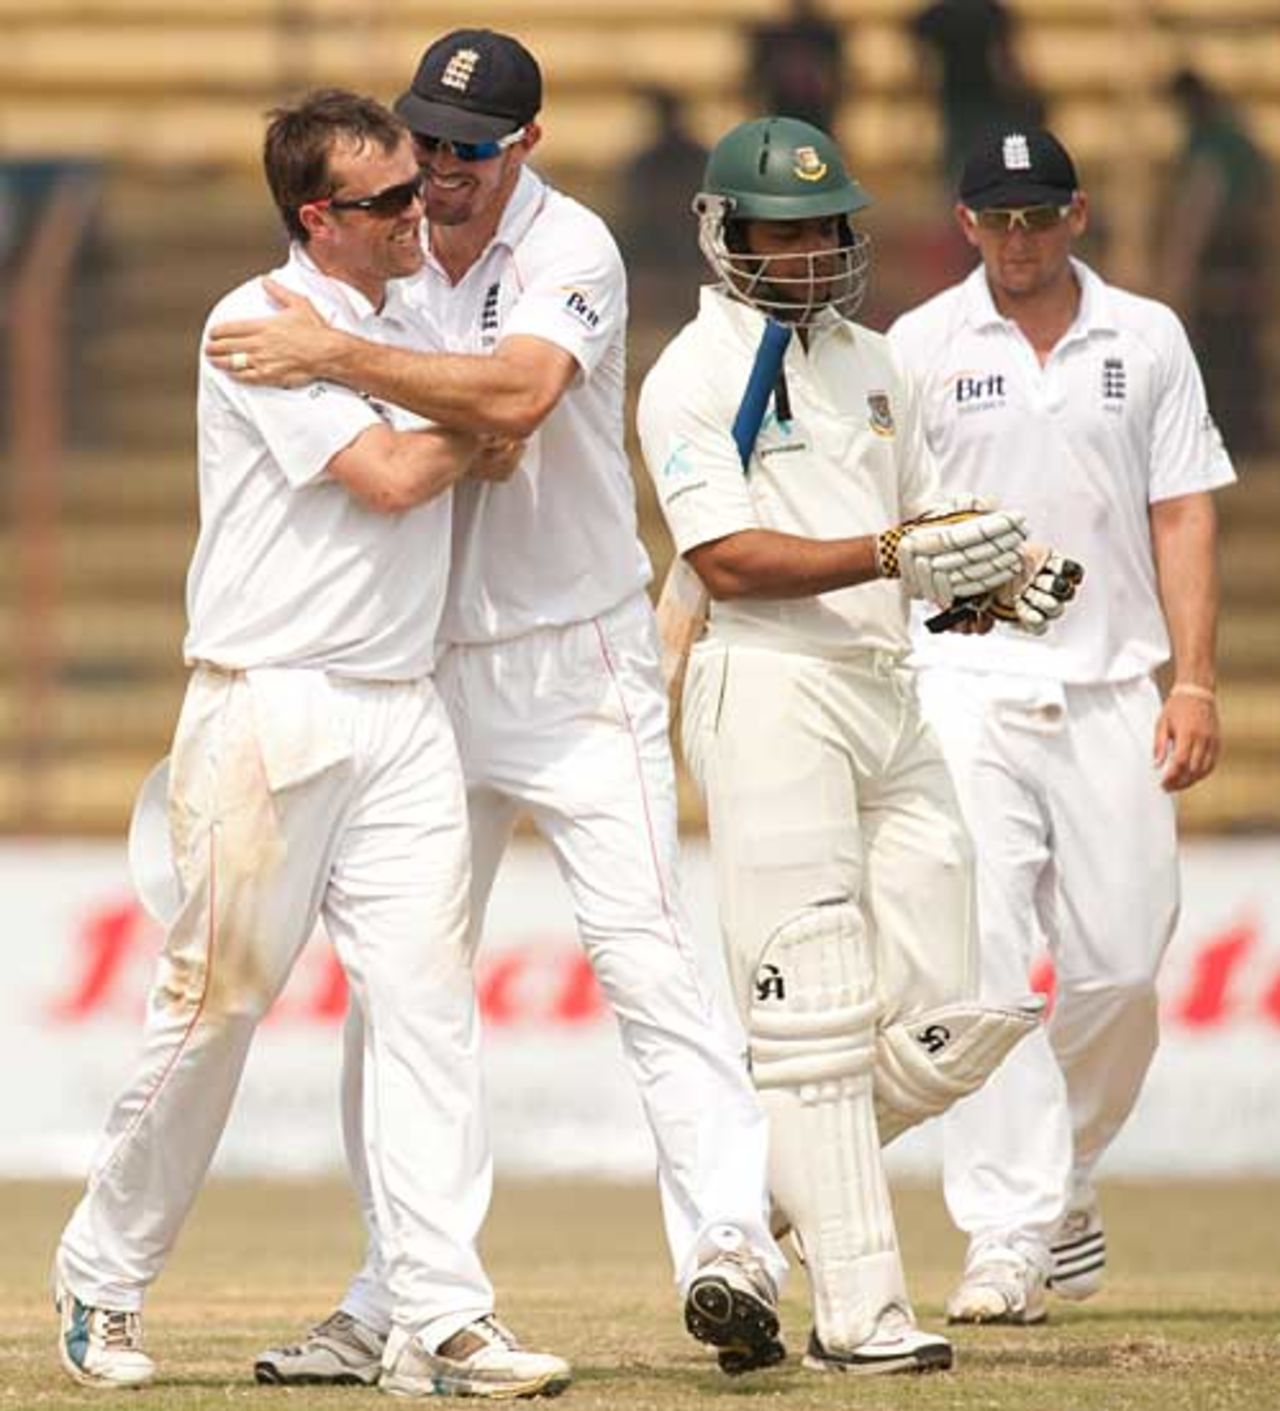 Graeme Swann collected his fifth five-wicket haul in Tests, Bangladesh v England, 1st Test, Chittagong, March 14, 2010